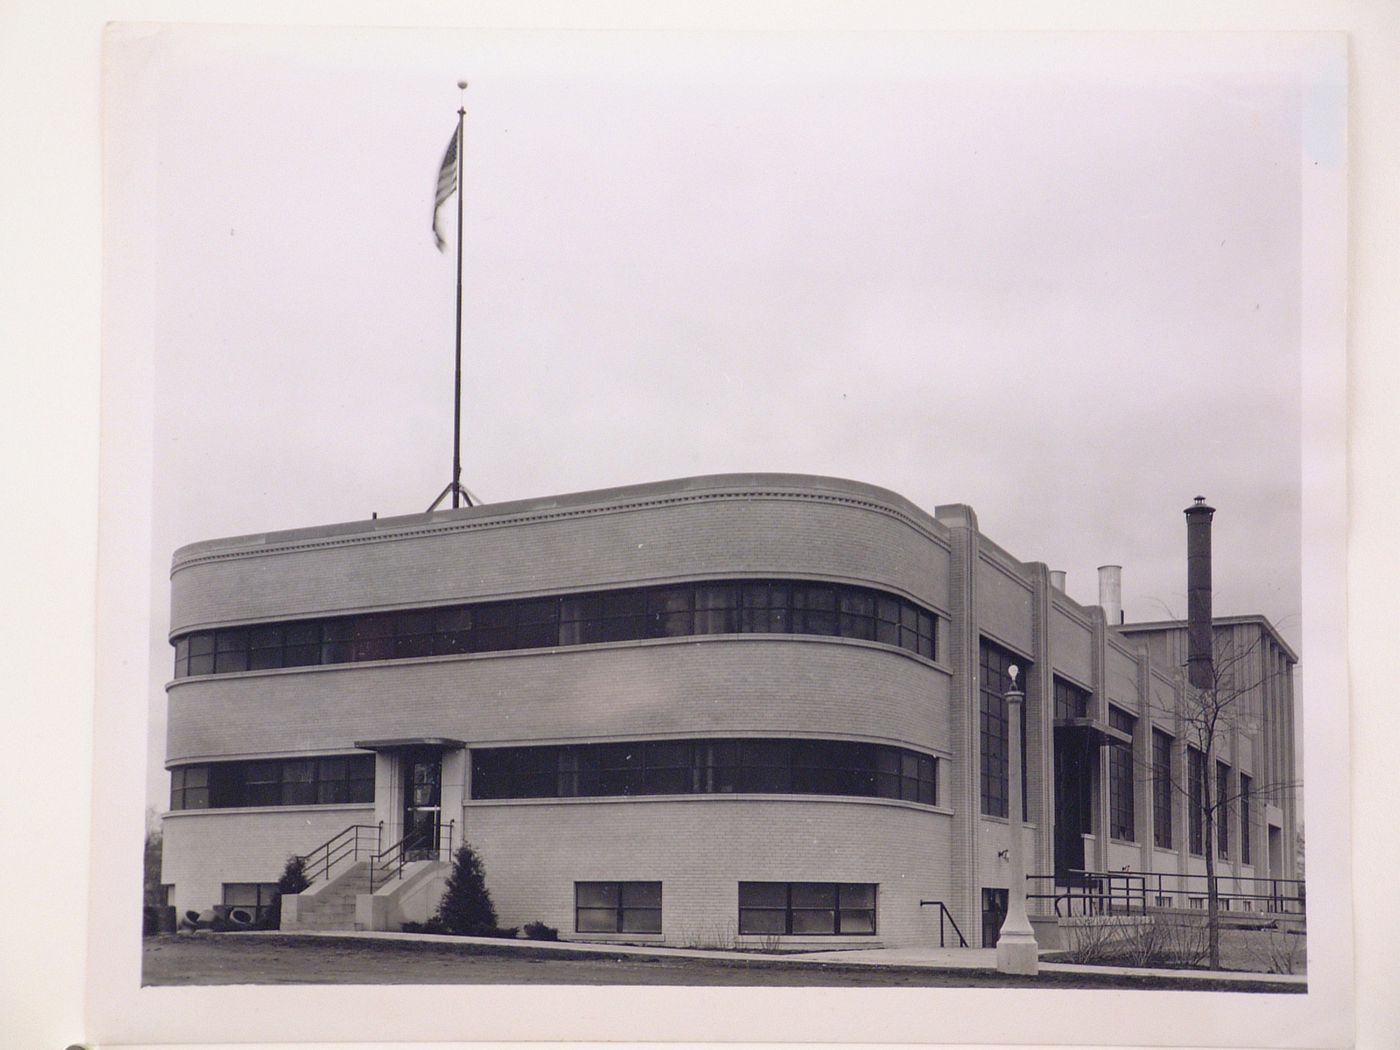 View of the principal and lateral façades of the Hydro Electric Plant, Ford Motor Company Automobile Assembly Plant, Milford, Michigan